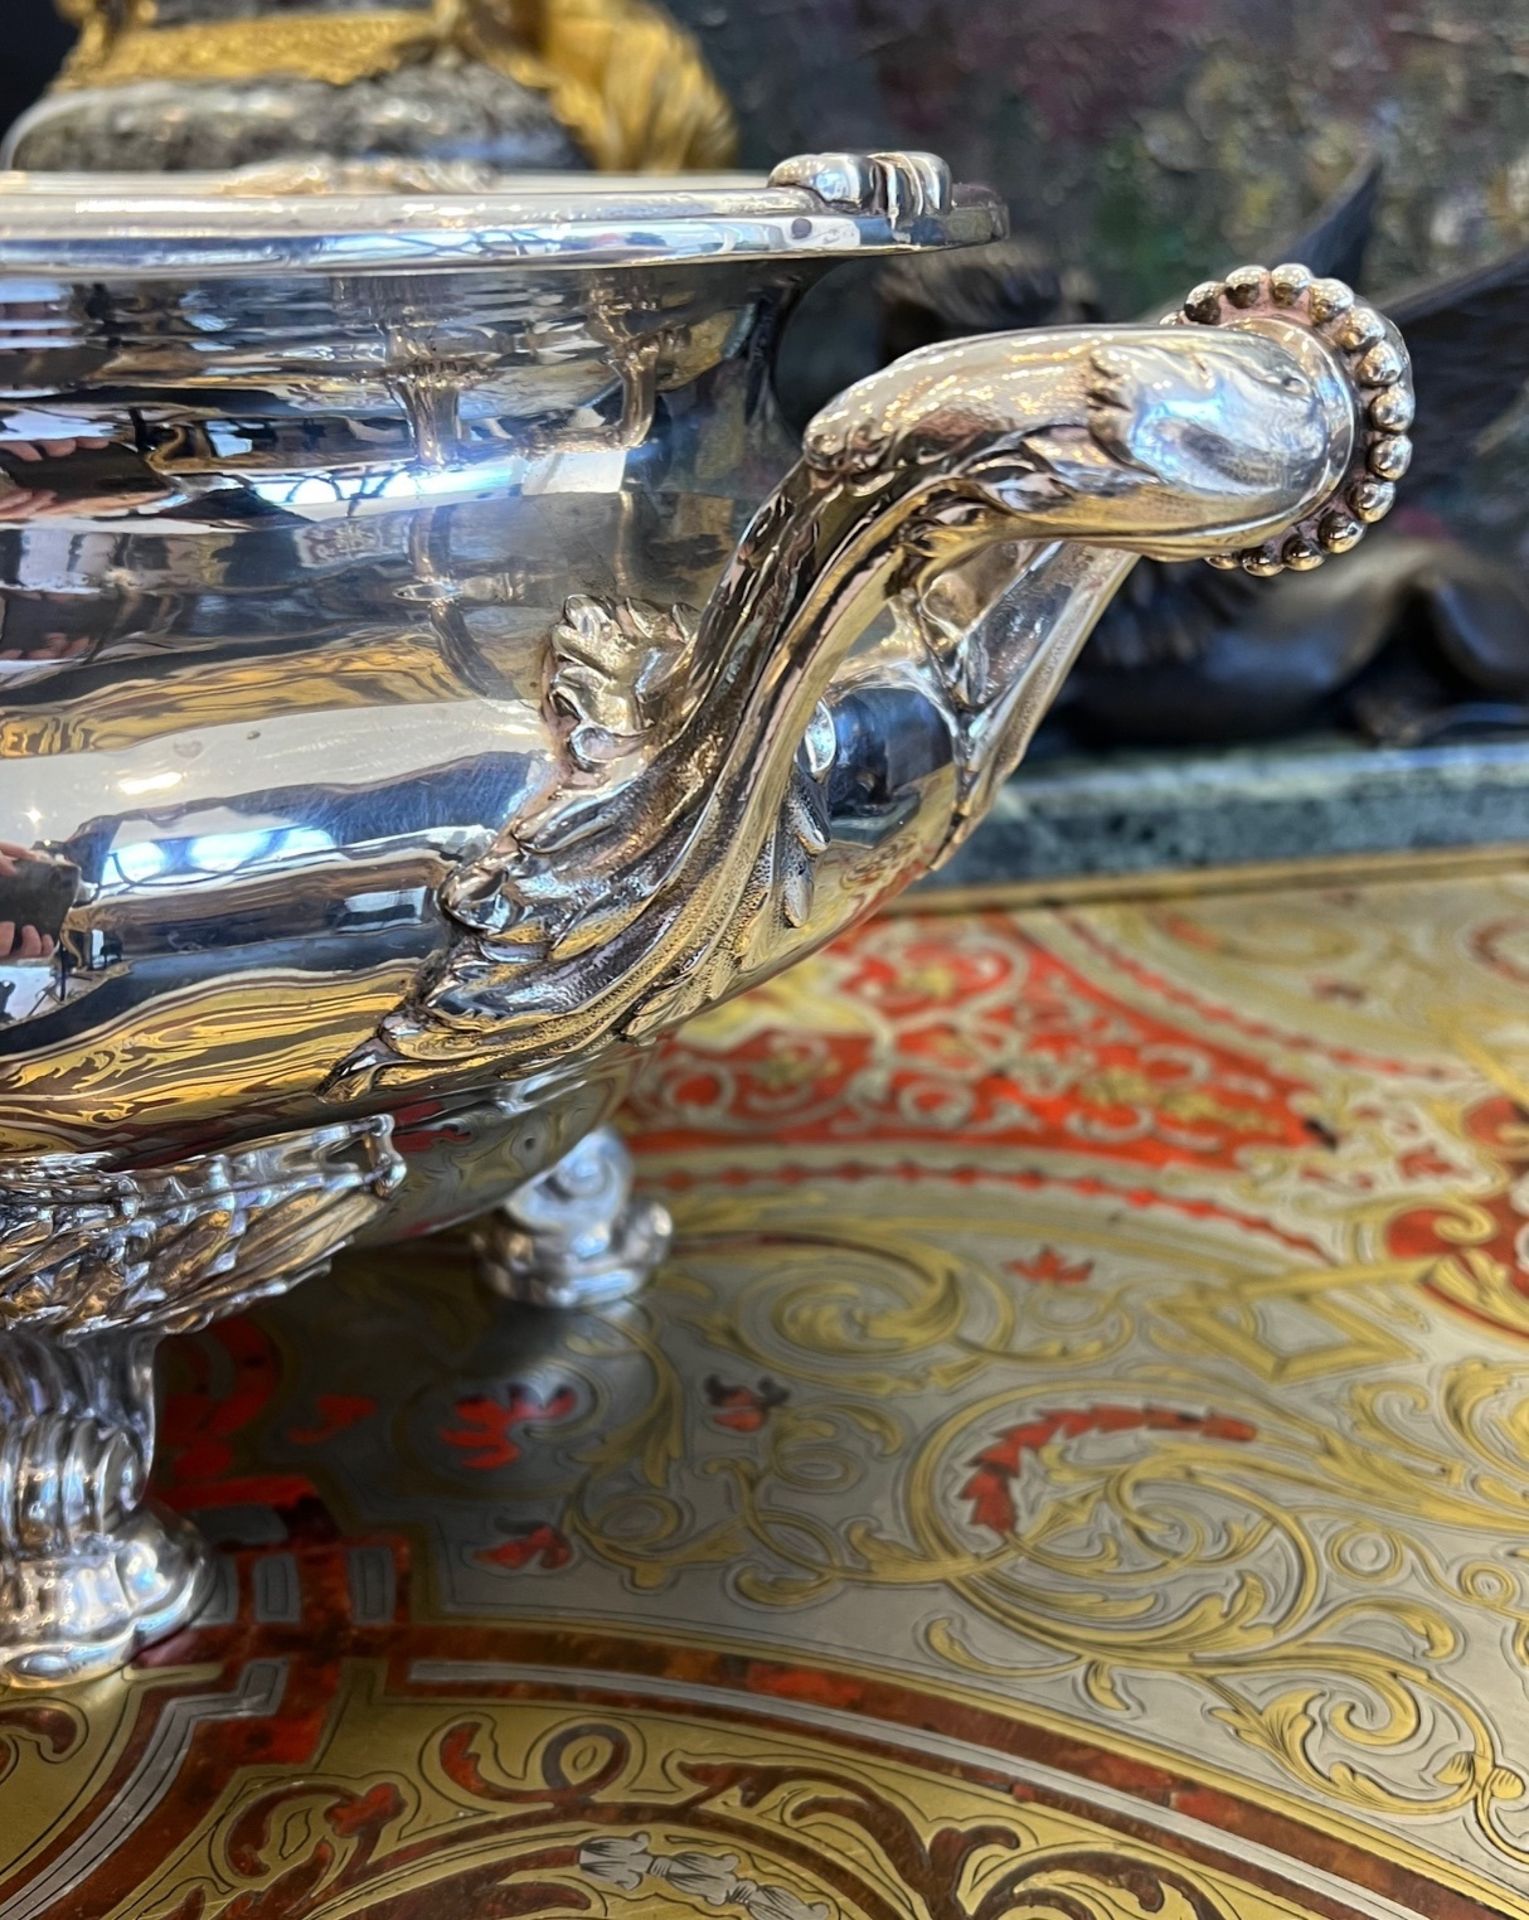 A LARGE STERLING SILVER 18TH CENTURY STYLE GERMAN WINE COOLER - Image 4 of 6